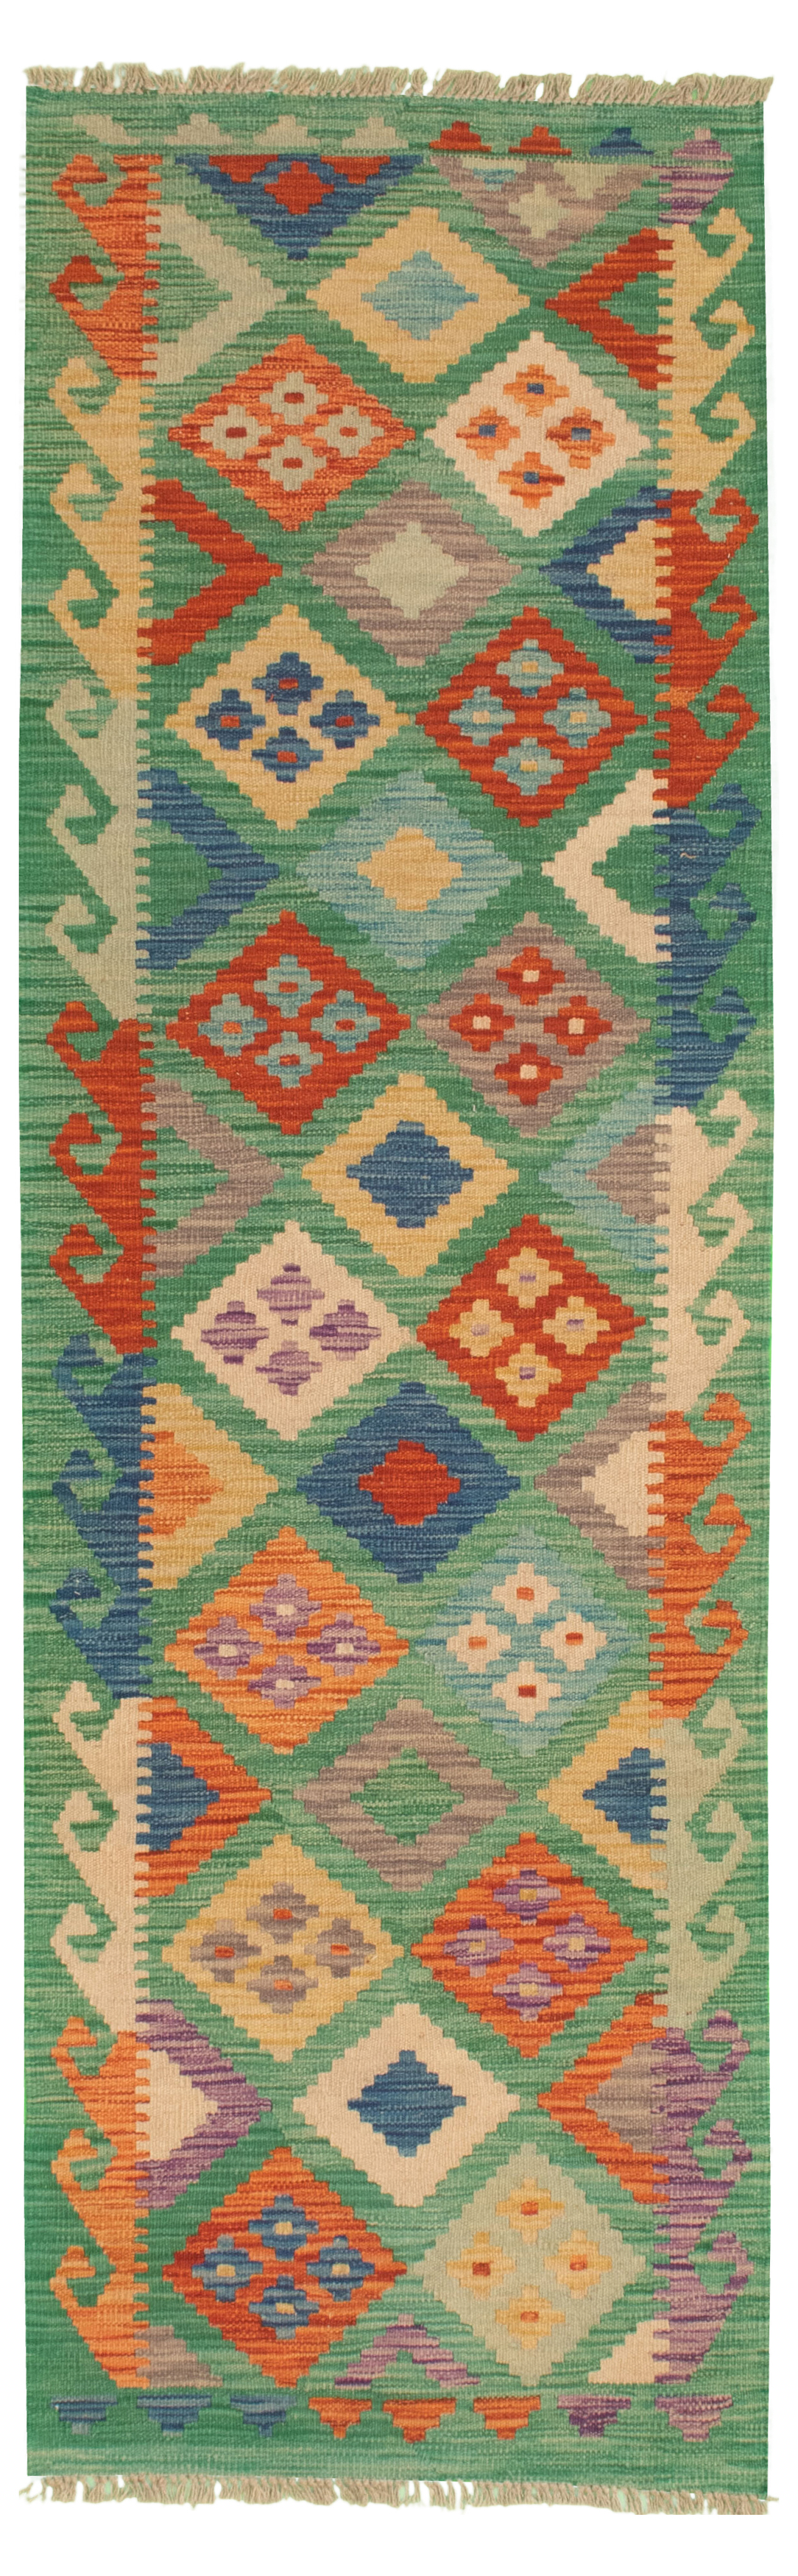 Hand woven Bold and Colorful  Turquoise Wool Kilim 2'7" x 8'4" Size: 2'7" x 8'4"  